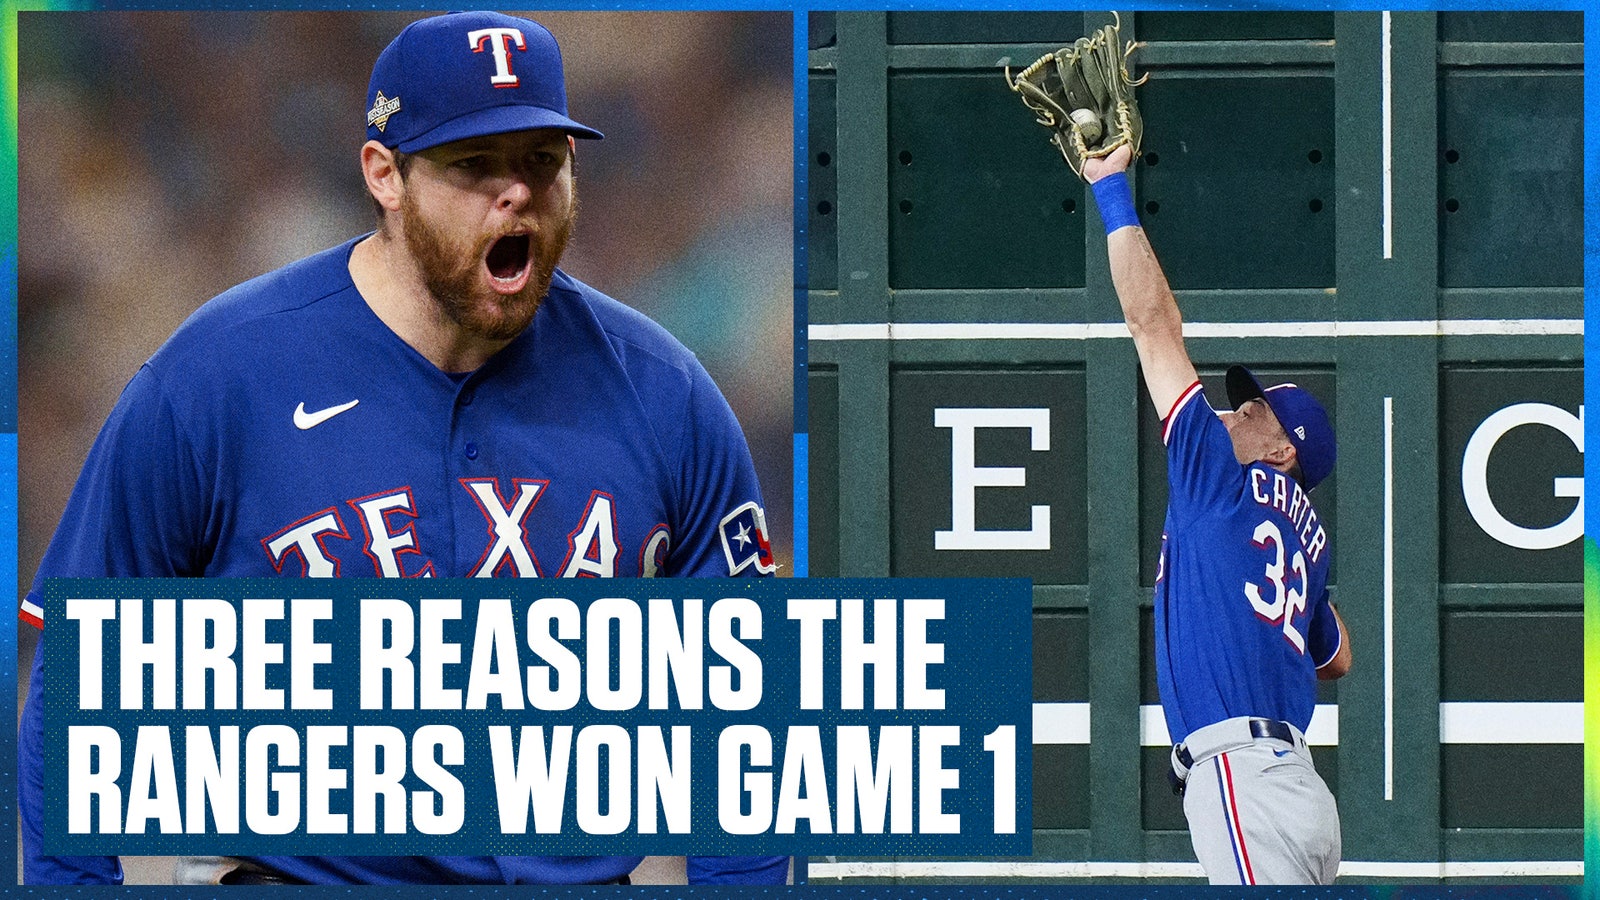 Texas Rangers make a statement on the road in Game 1 of the ALCS